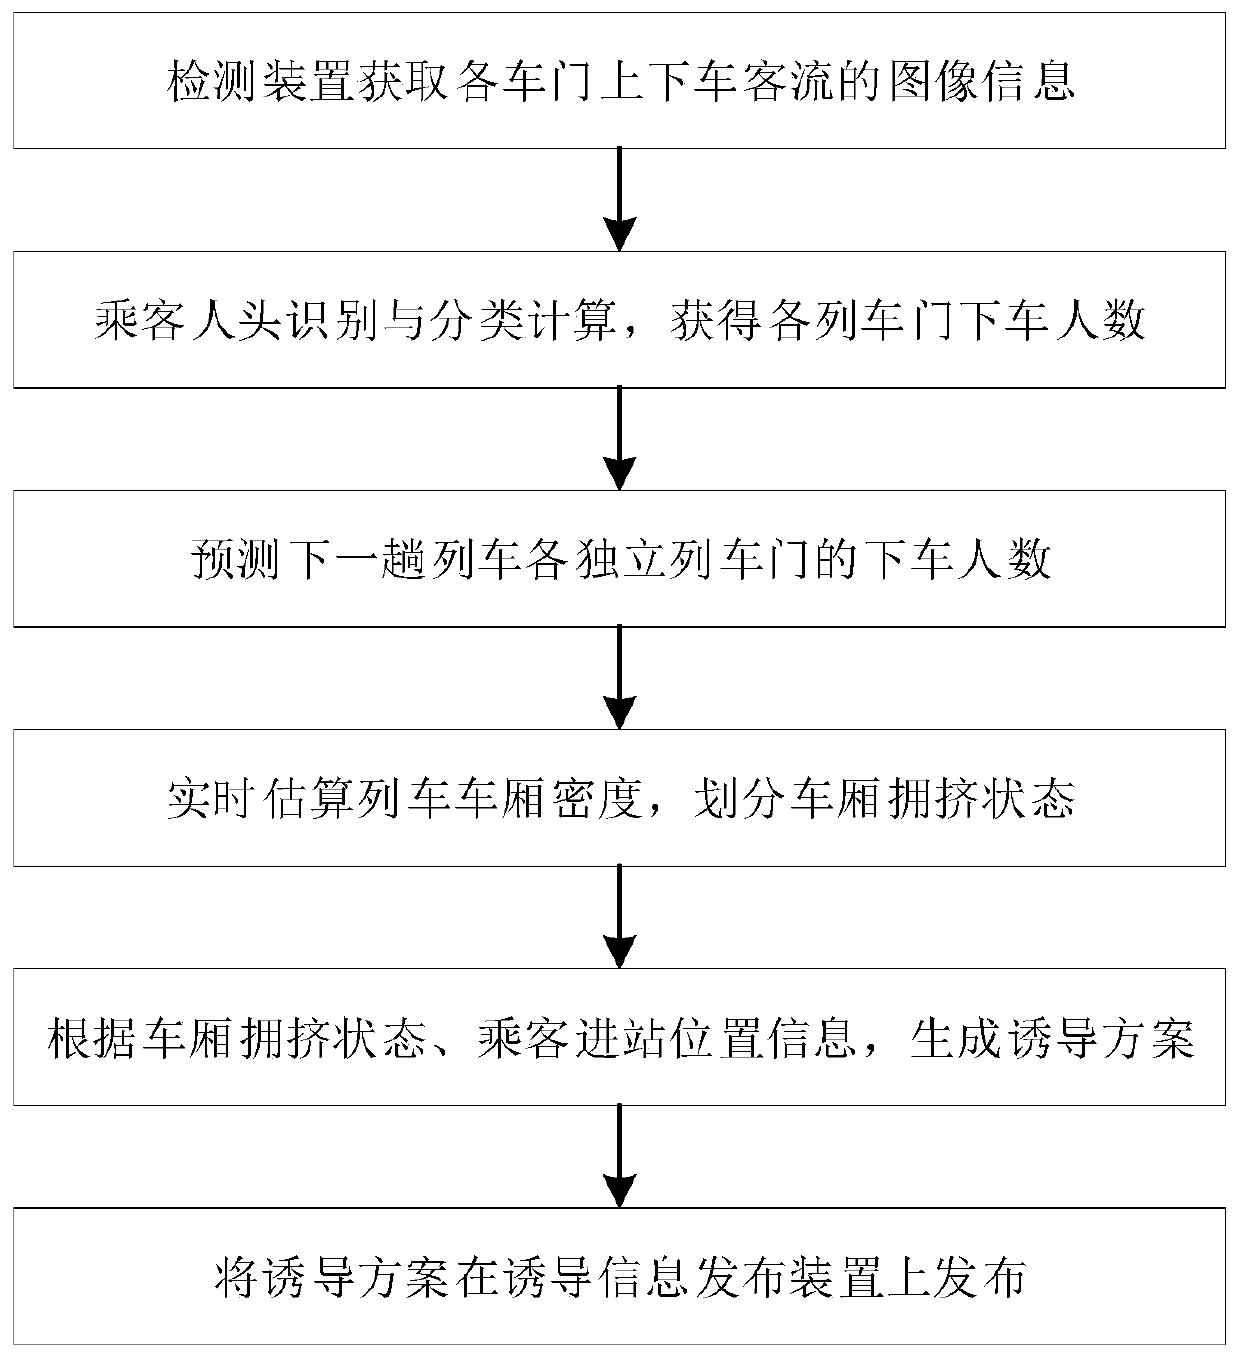 Subway train carriage passenger flow detection and prediction and platform waiting induction system